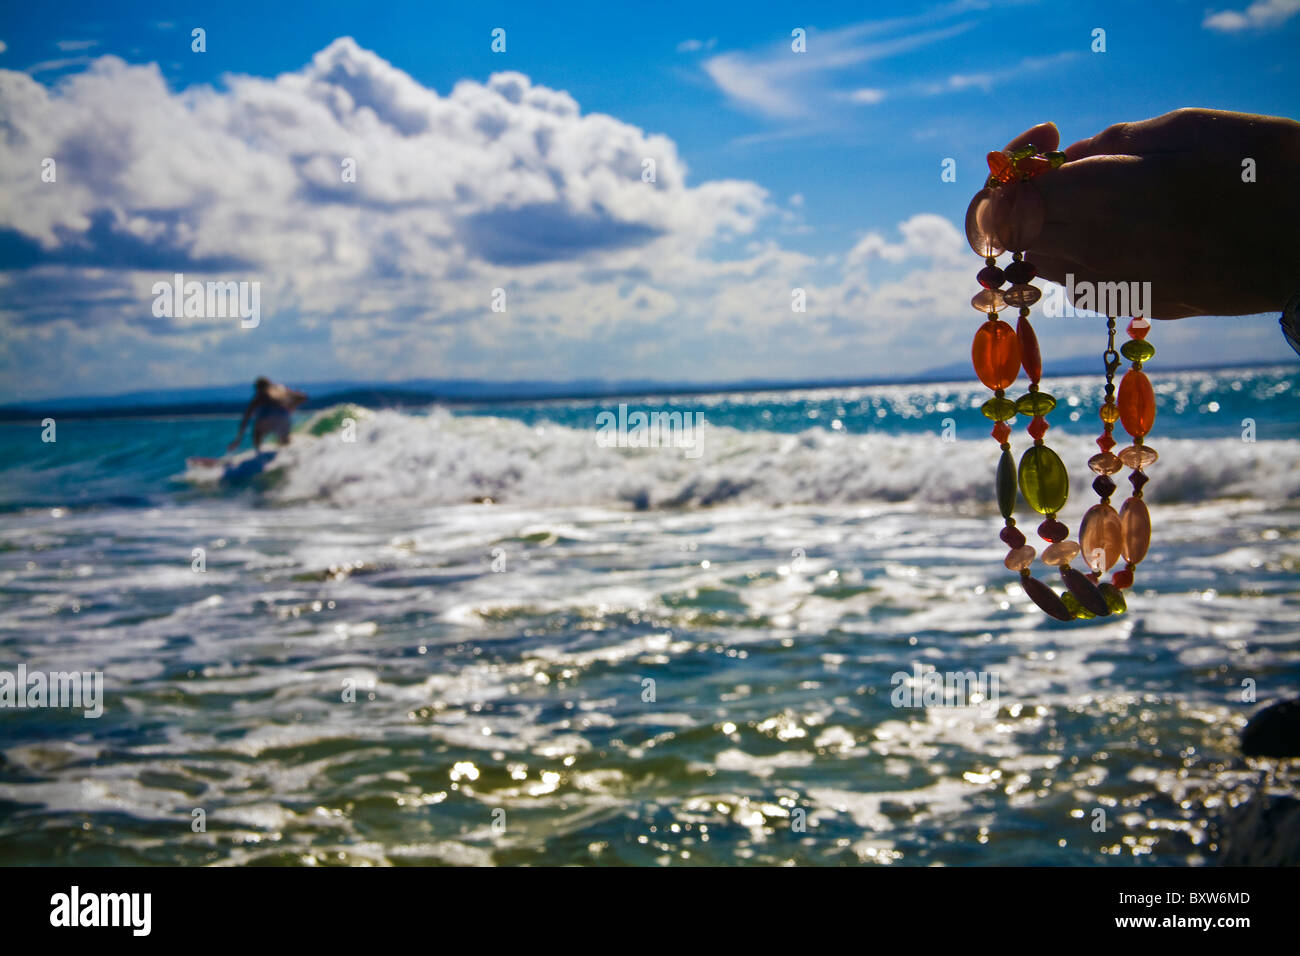 A woman's hand holding beaded necklace with Australian surfer riding a wave in background, beautiful blue sky day with clouds Stock Photo